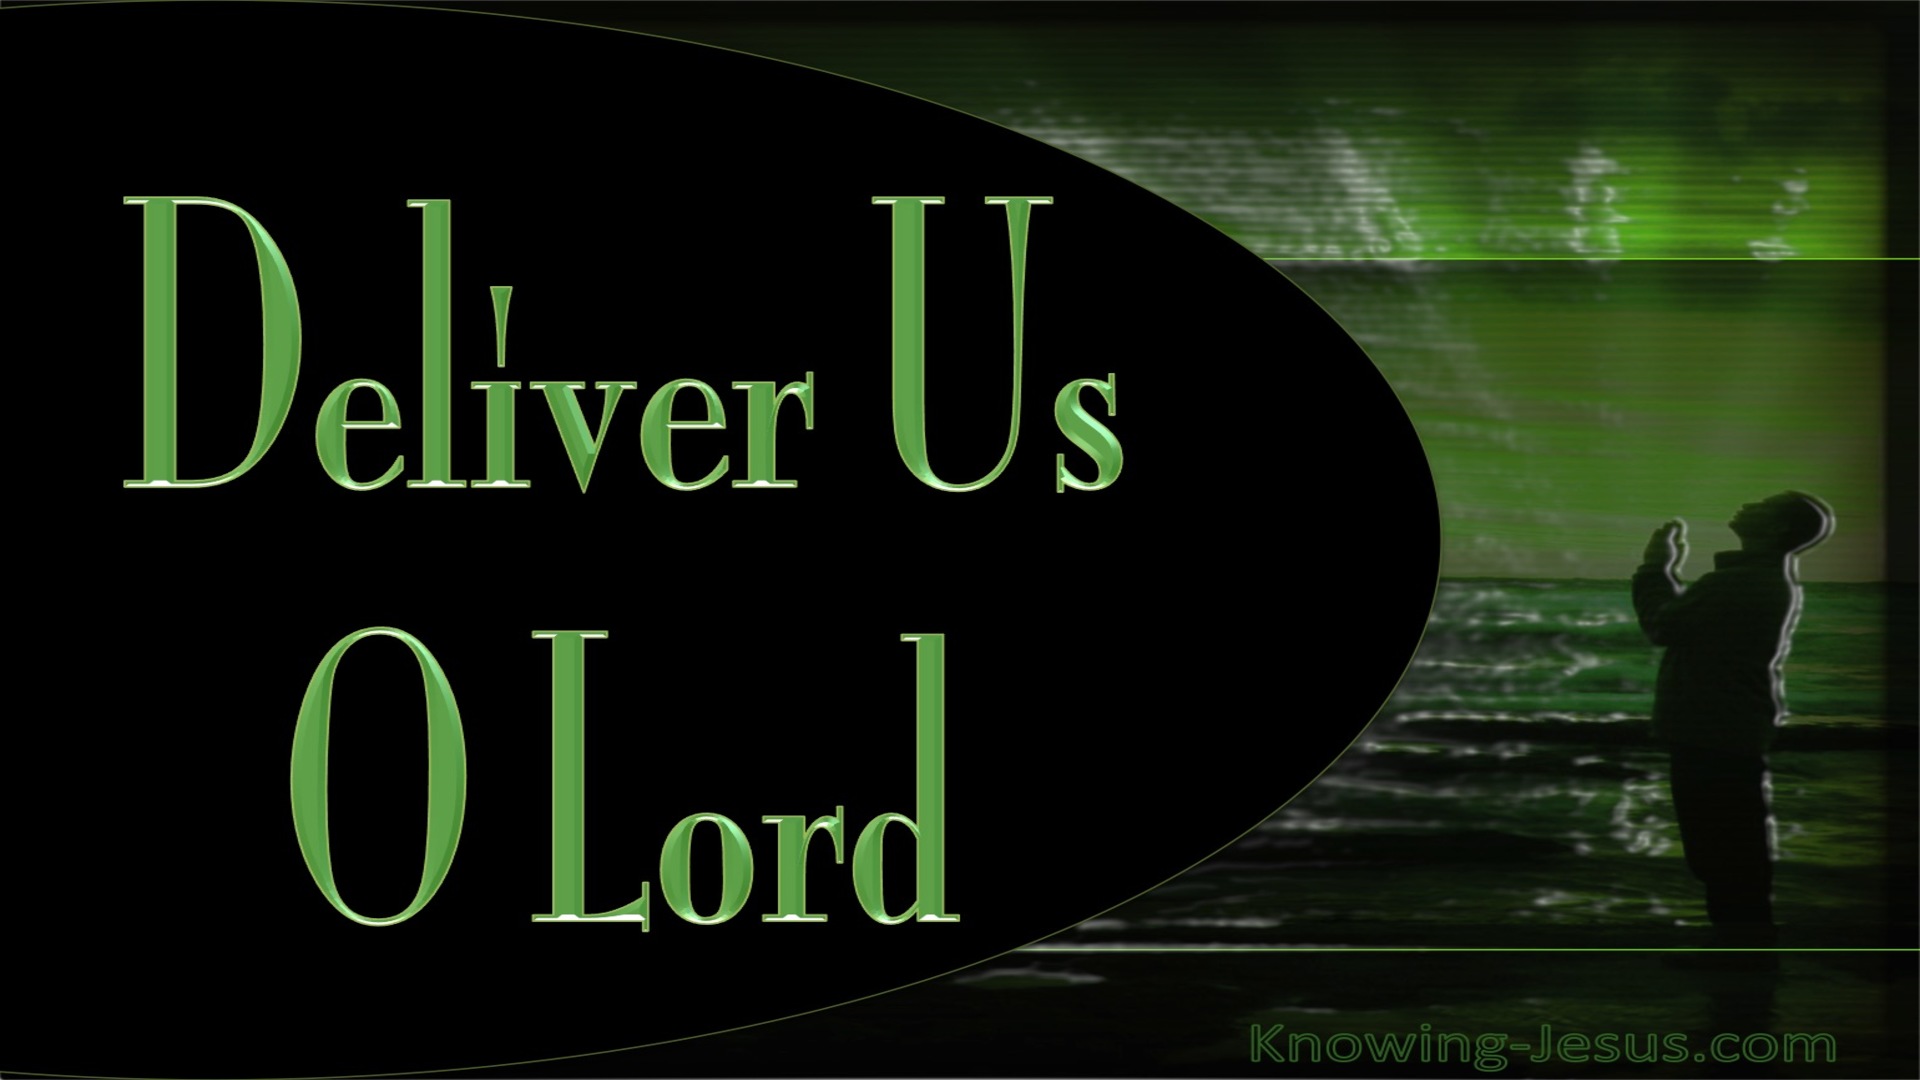 Matthew 6:13 Deliver Us O Lord (black)